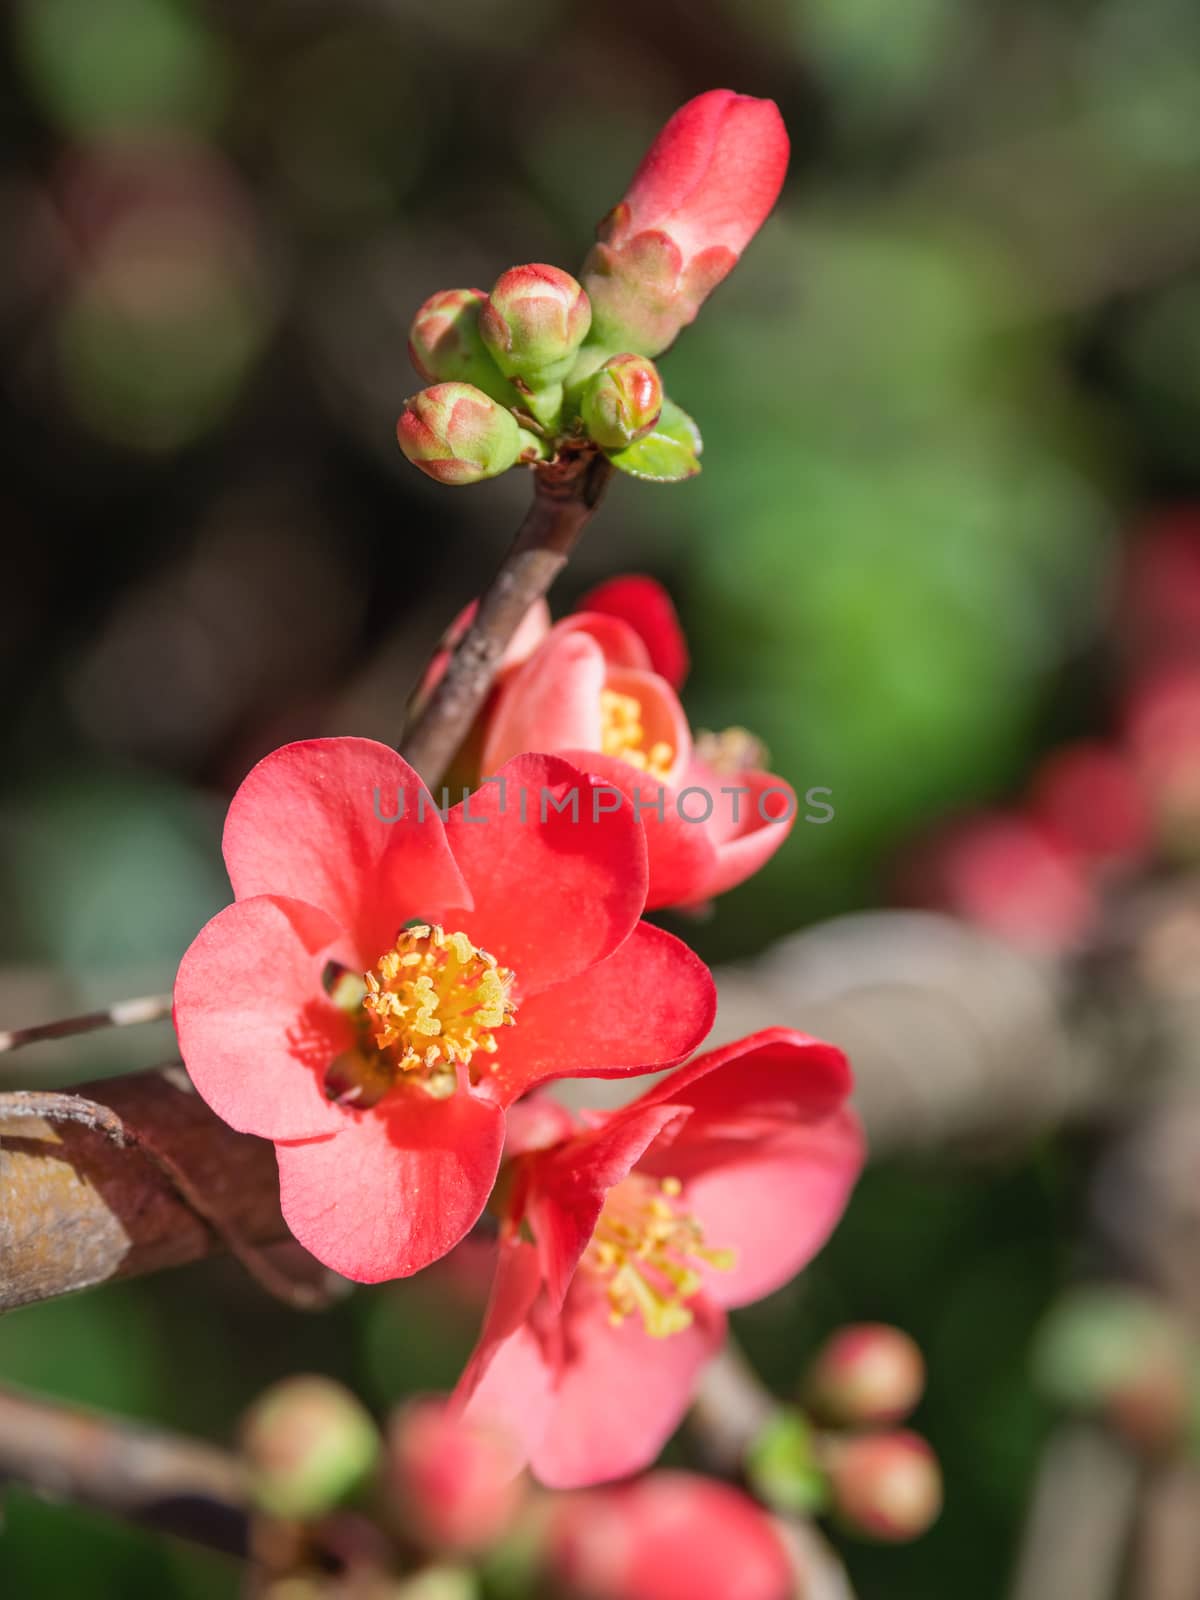 Blooming Chaenomeles japonica, known as either Japanese quince or Maule's quince. Bright red flowers in spring sunny day.